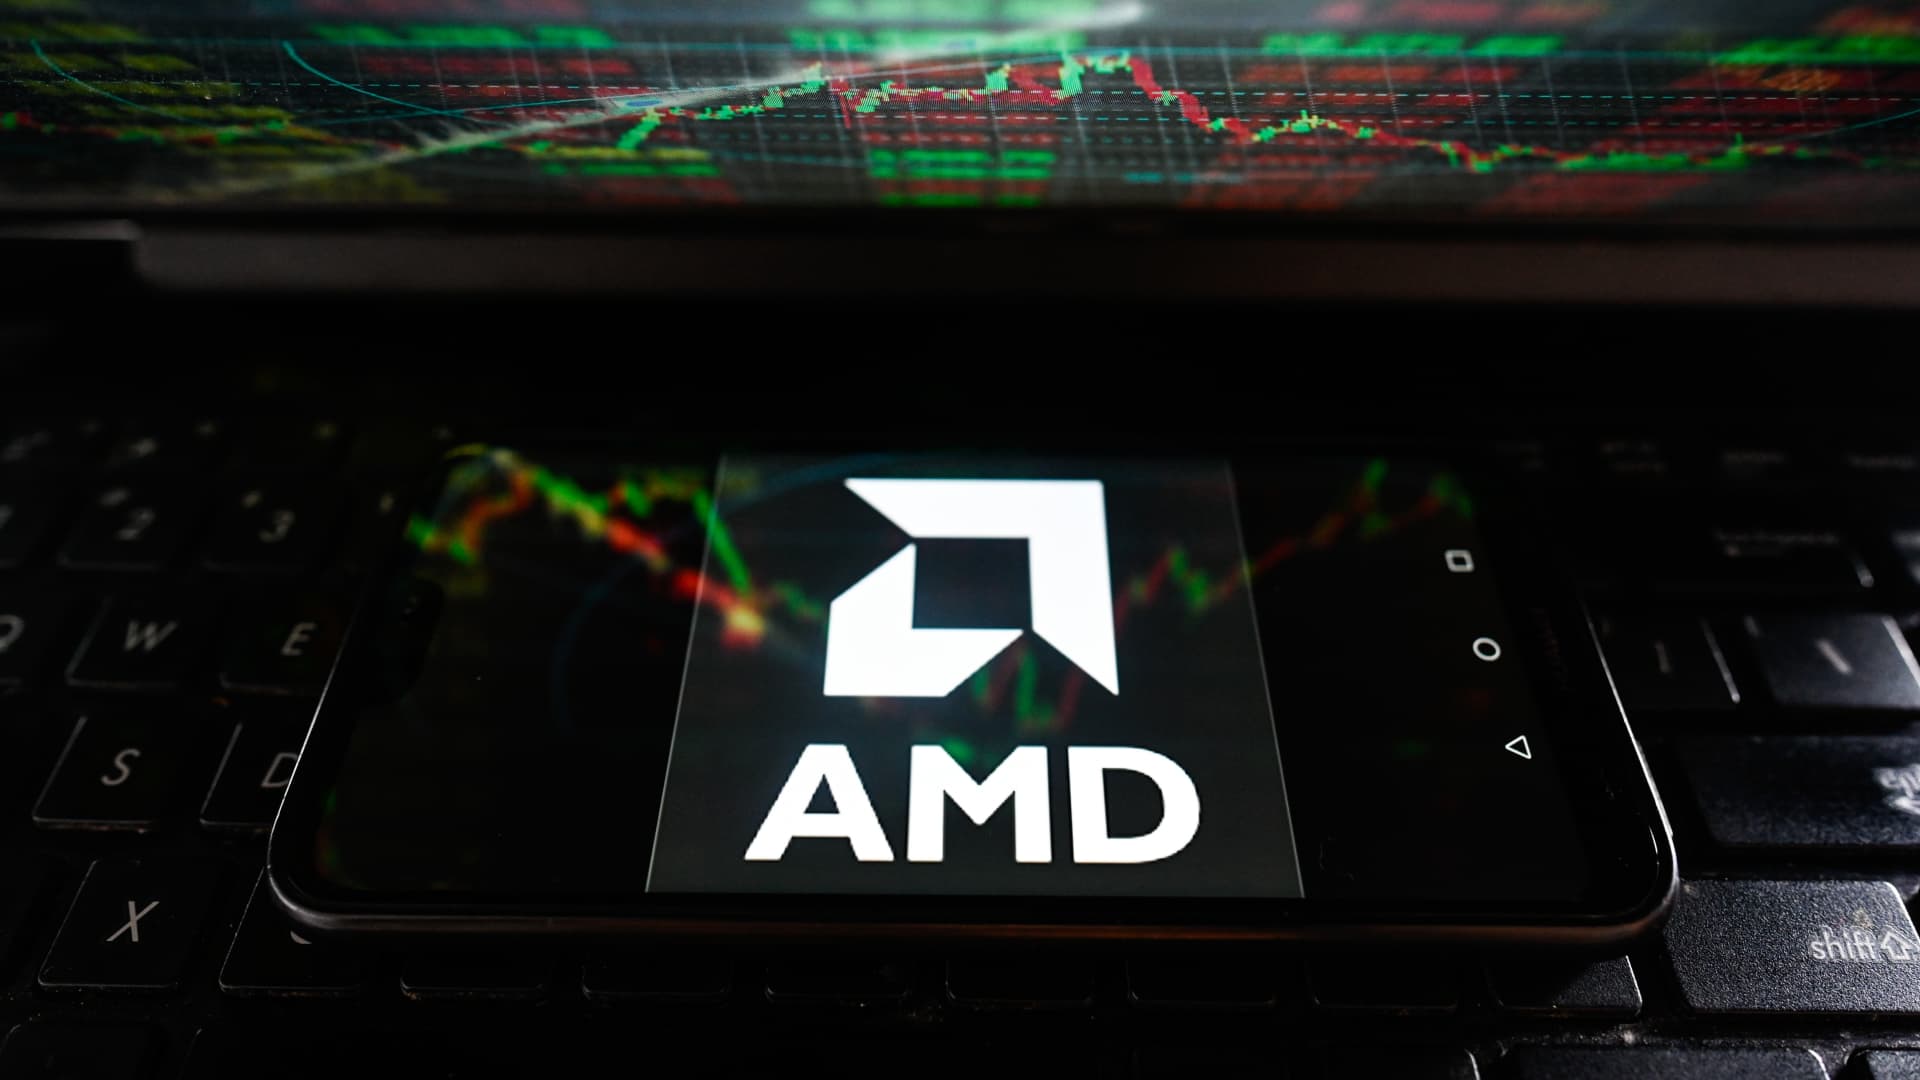 AMD launches new chip for AI PCs amid fierce battle with Nvidia and Intel